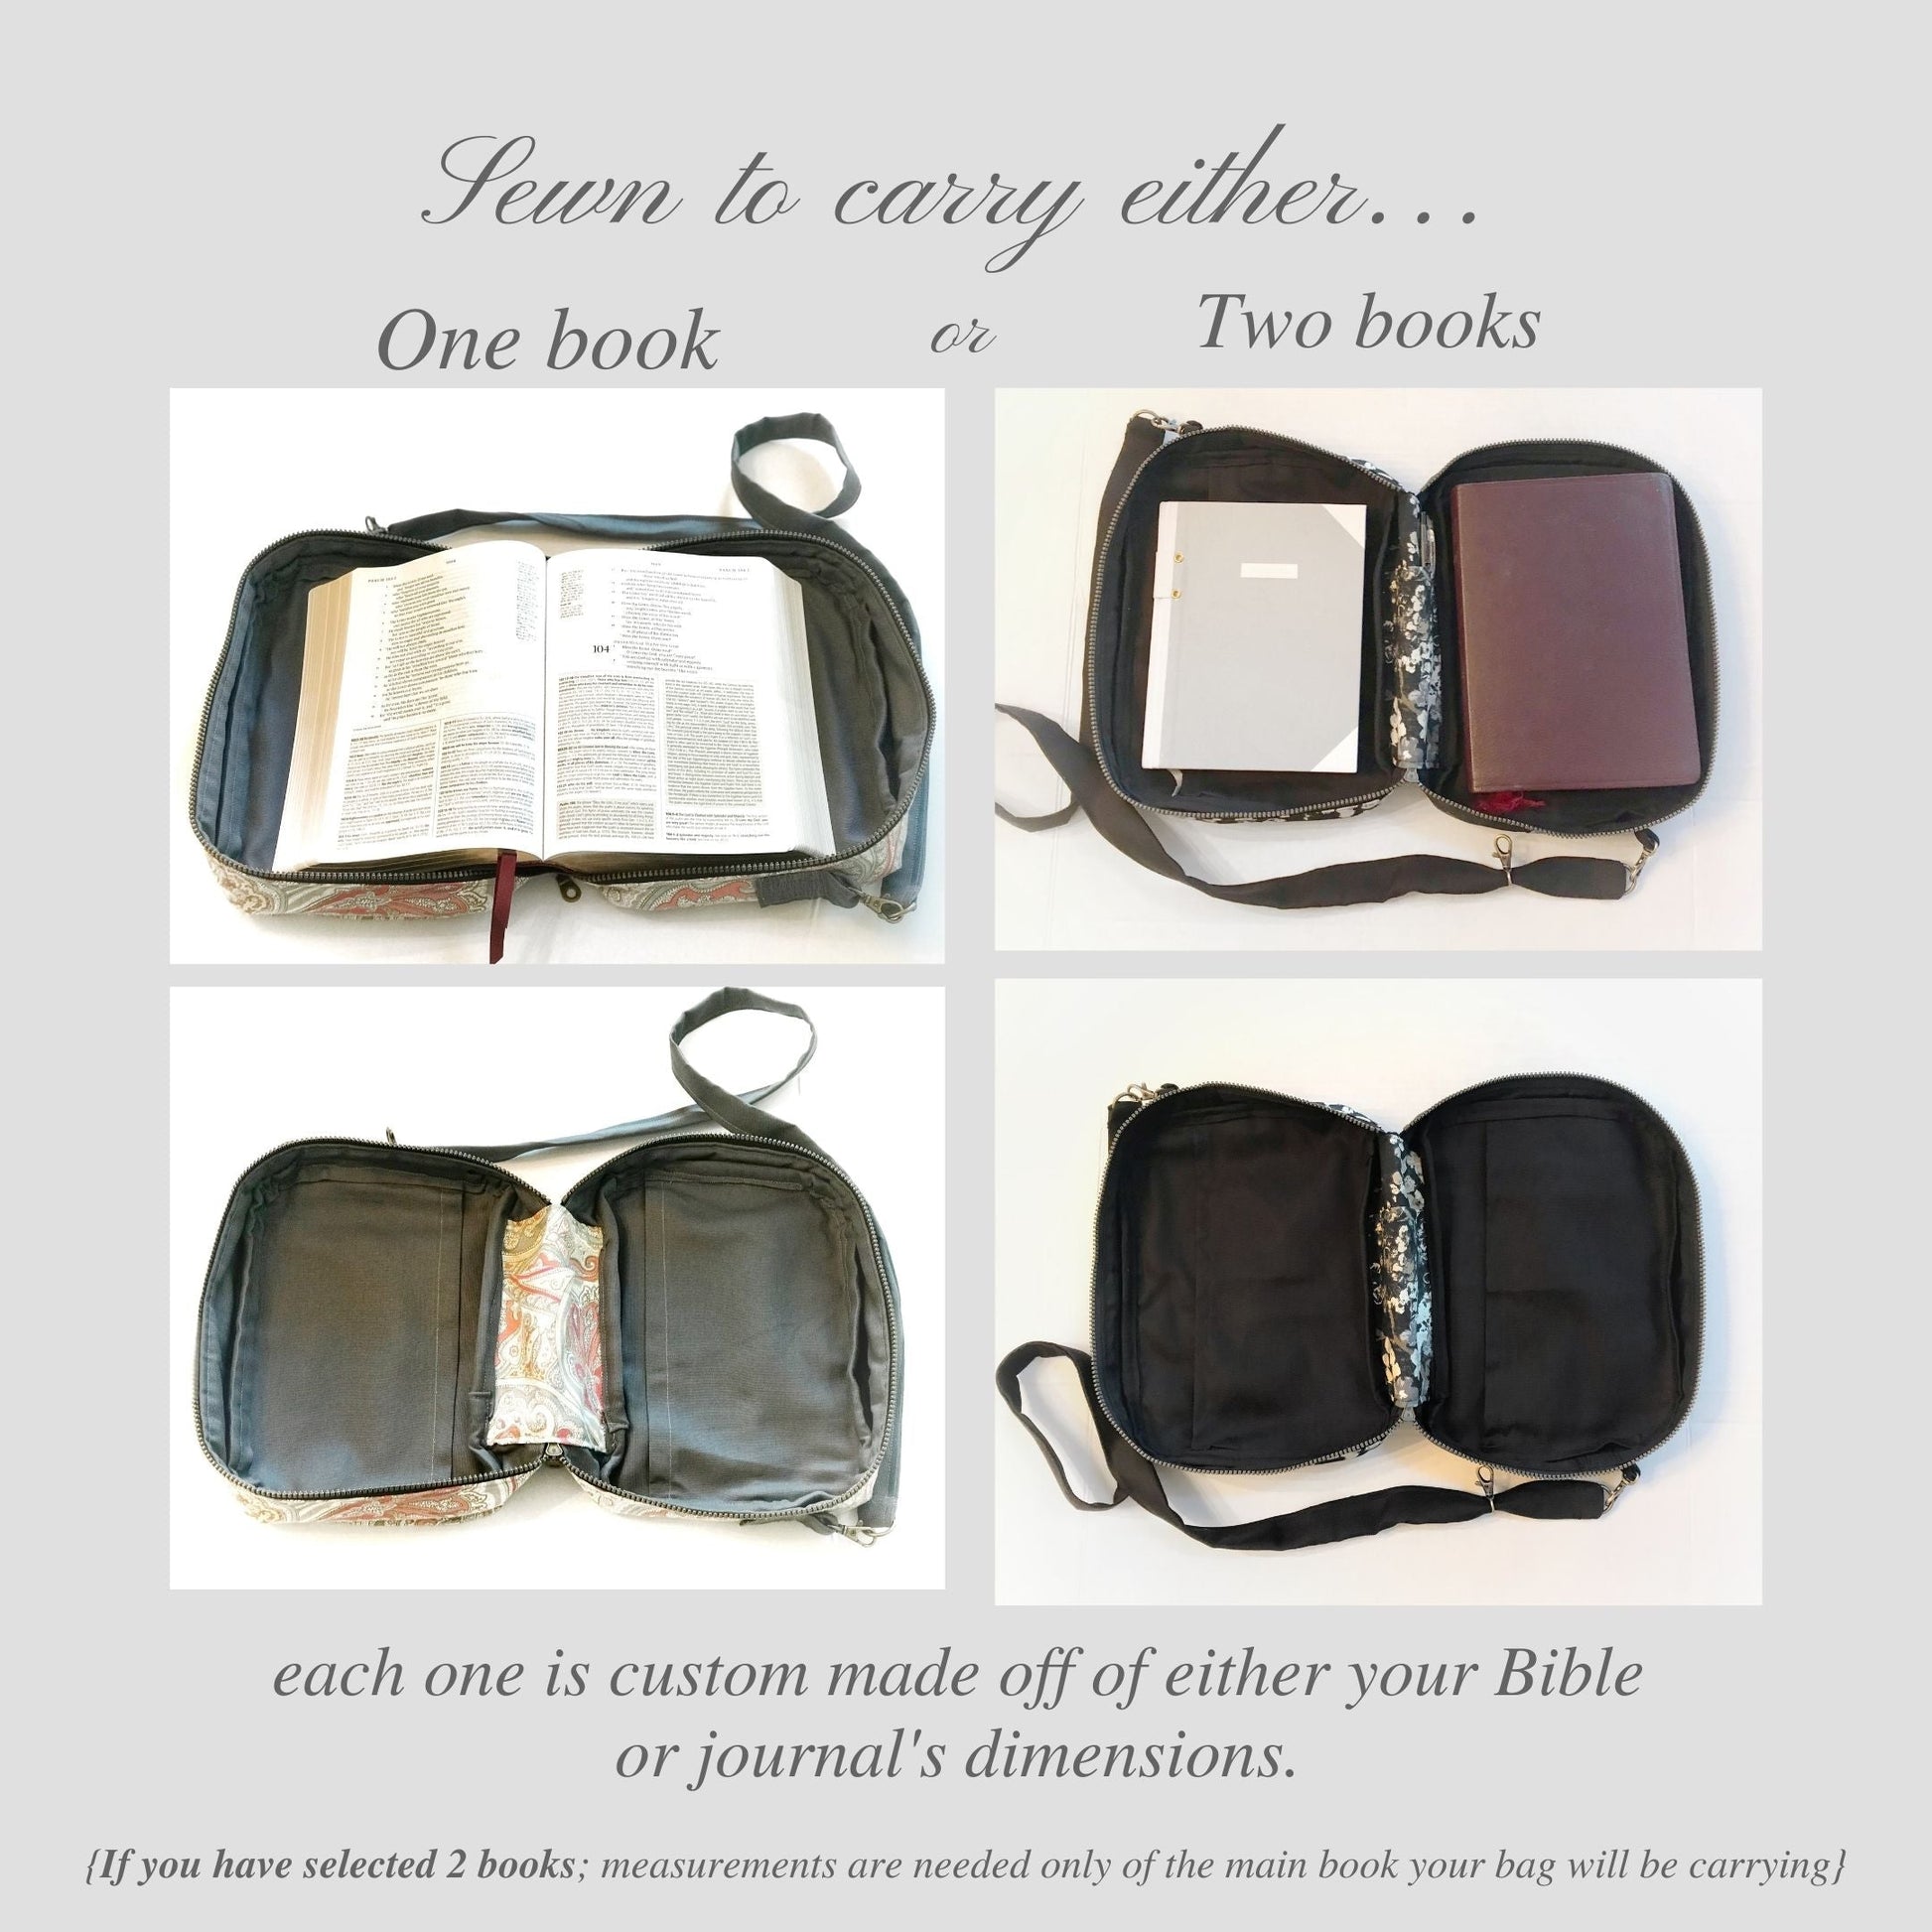 Graphic of Bible Bag description:Sewn to carry either one or two books in the main compartment (which opens like a Bible cover), each one is custom made off of either your Bible or journal's dimensions.